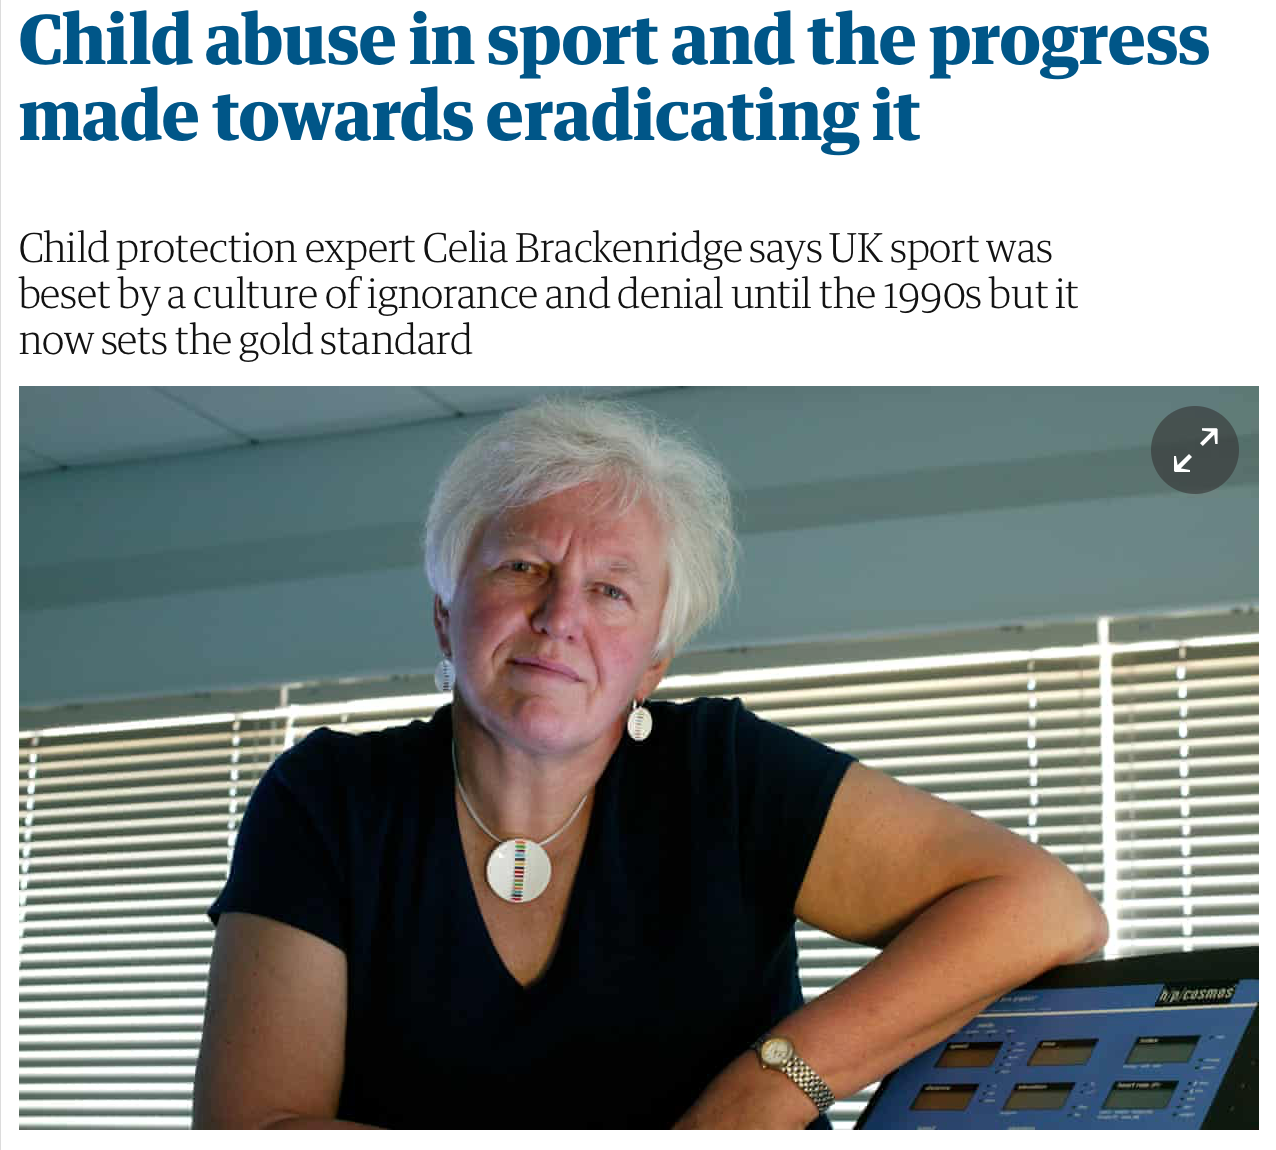 [European Union] Child abuse in sport and the progress made towards eradicating it